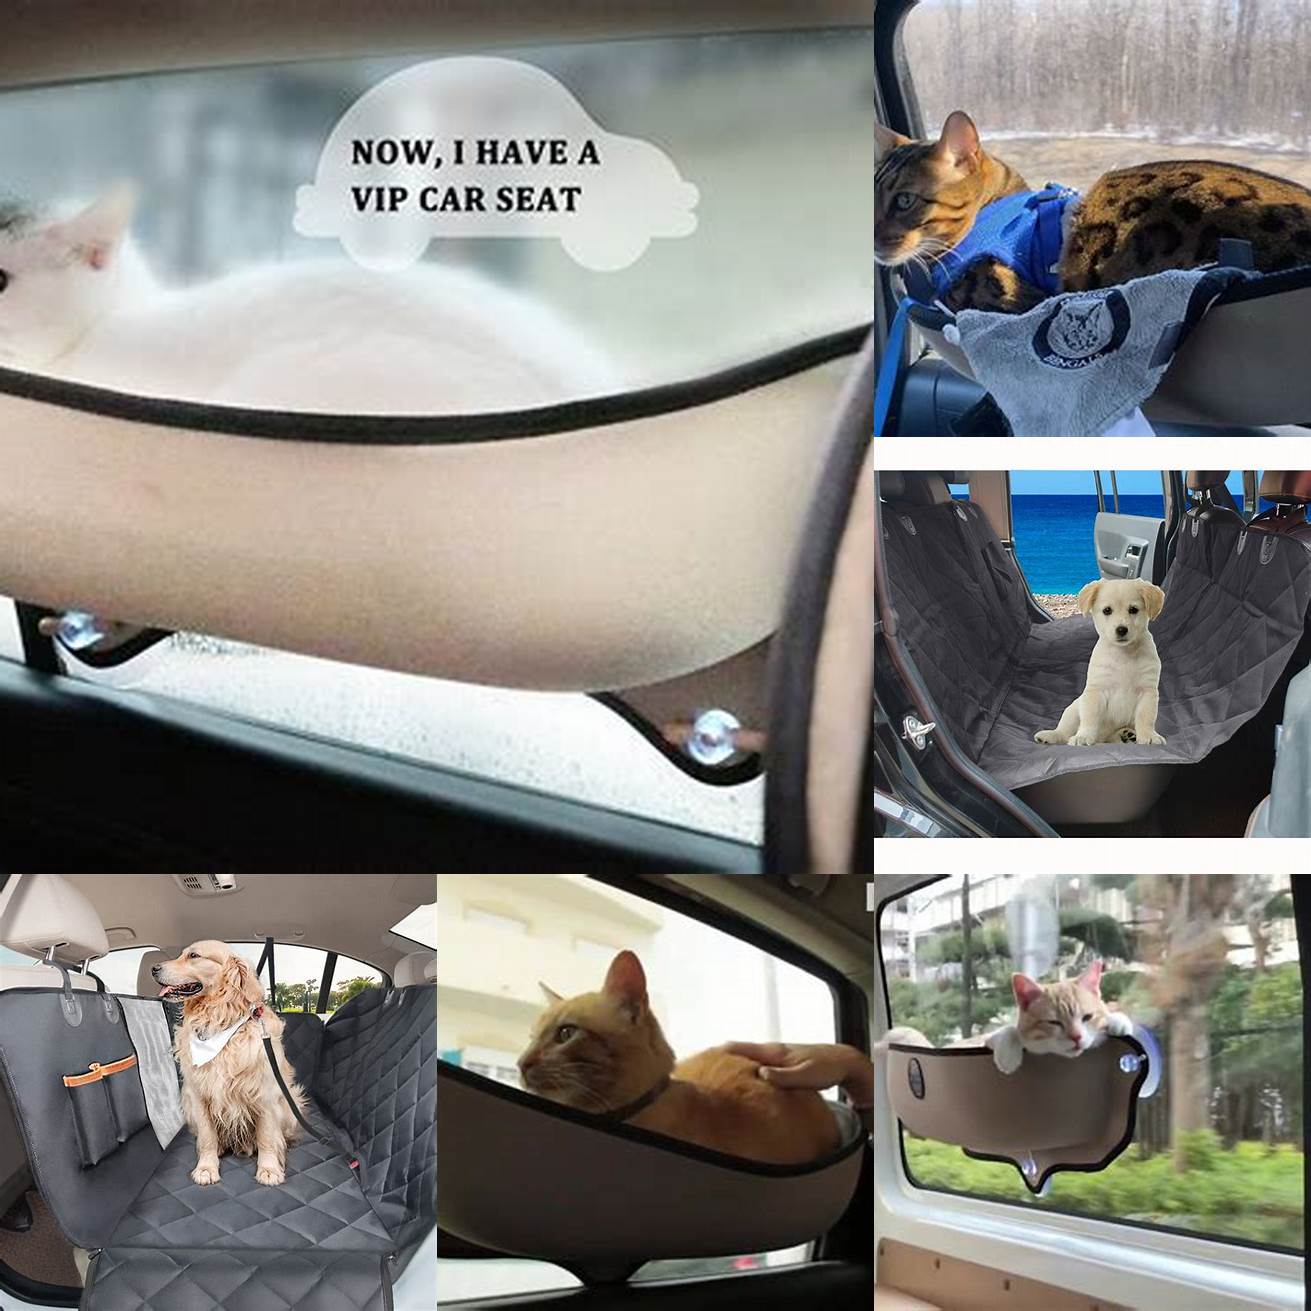 Q Is the car hammock for cats safe